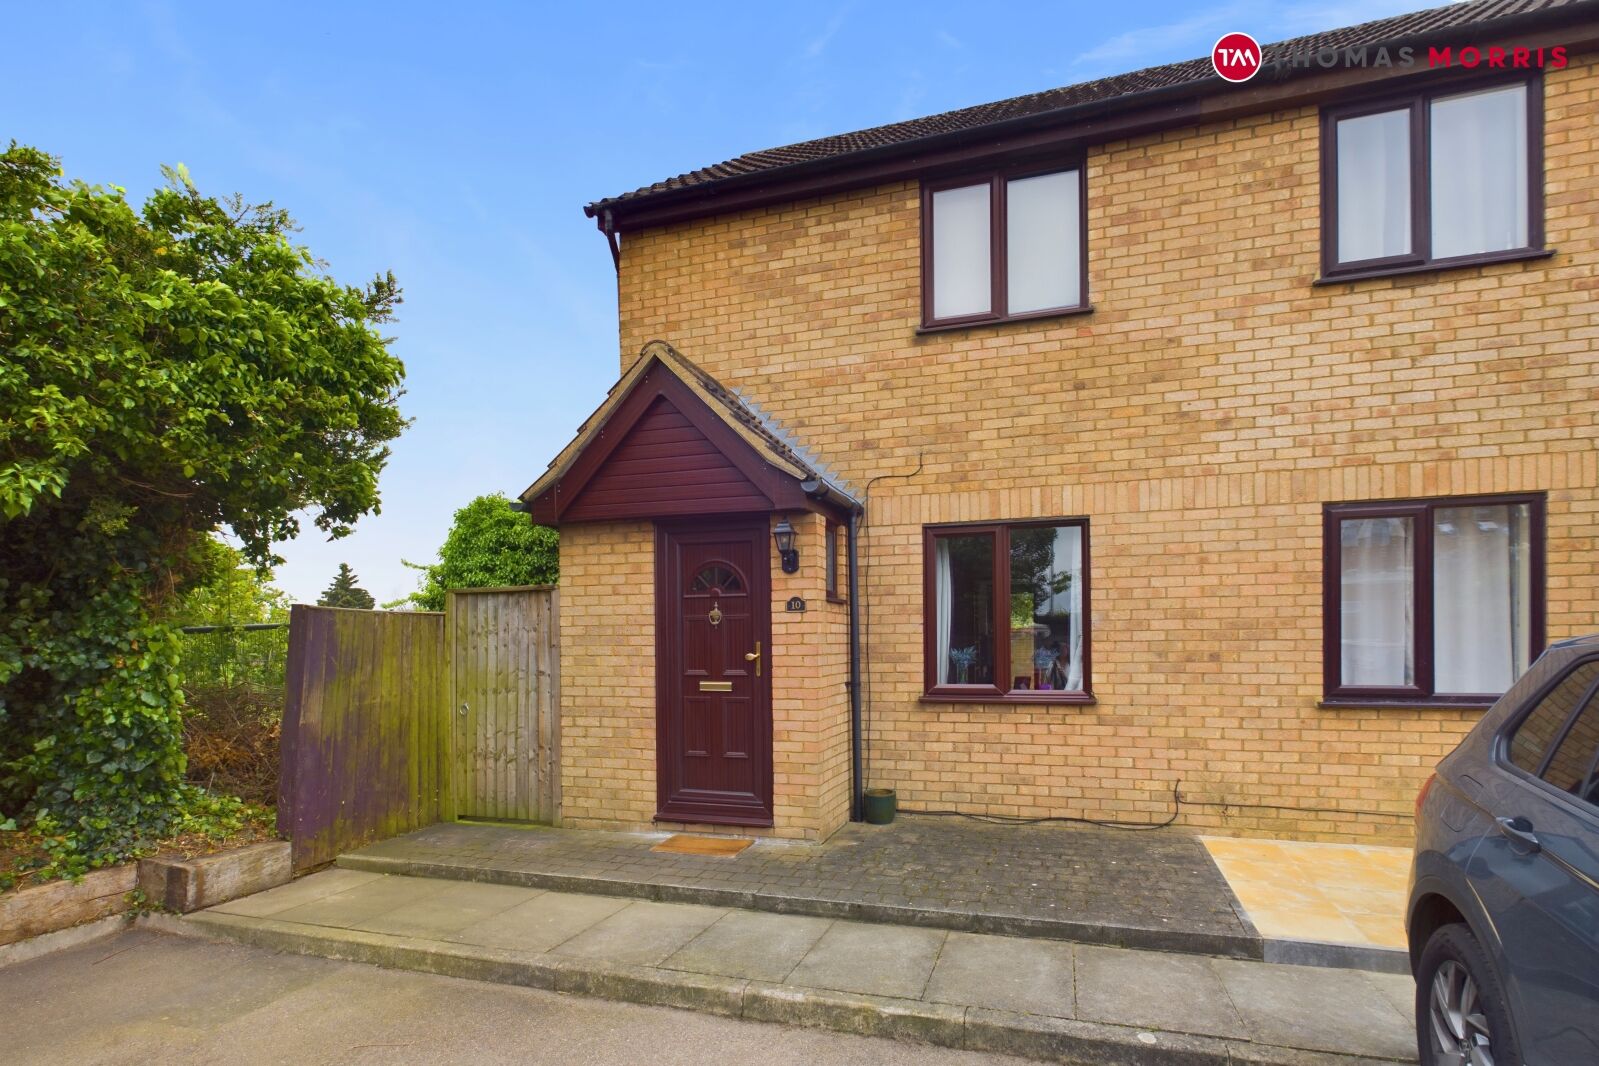 2 bedroom semi detached house for sale Hillview, Beeston, SG19, main image